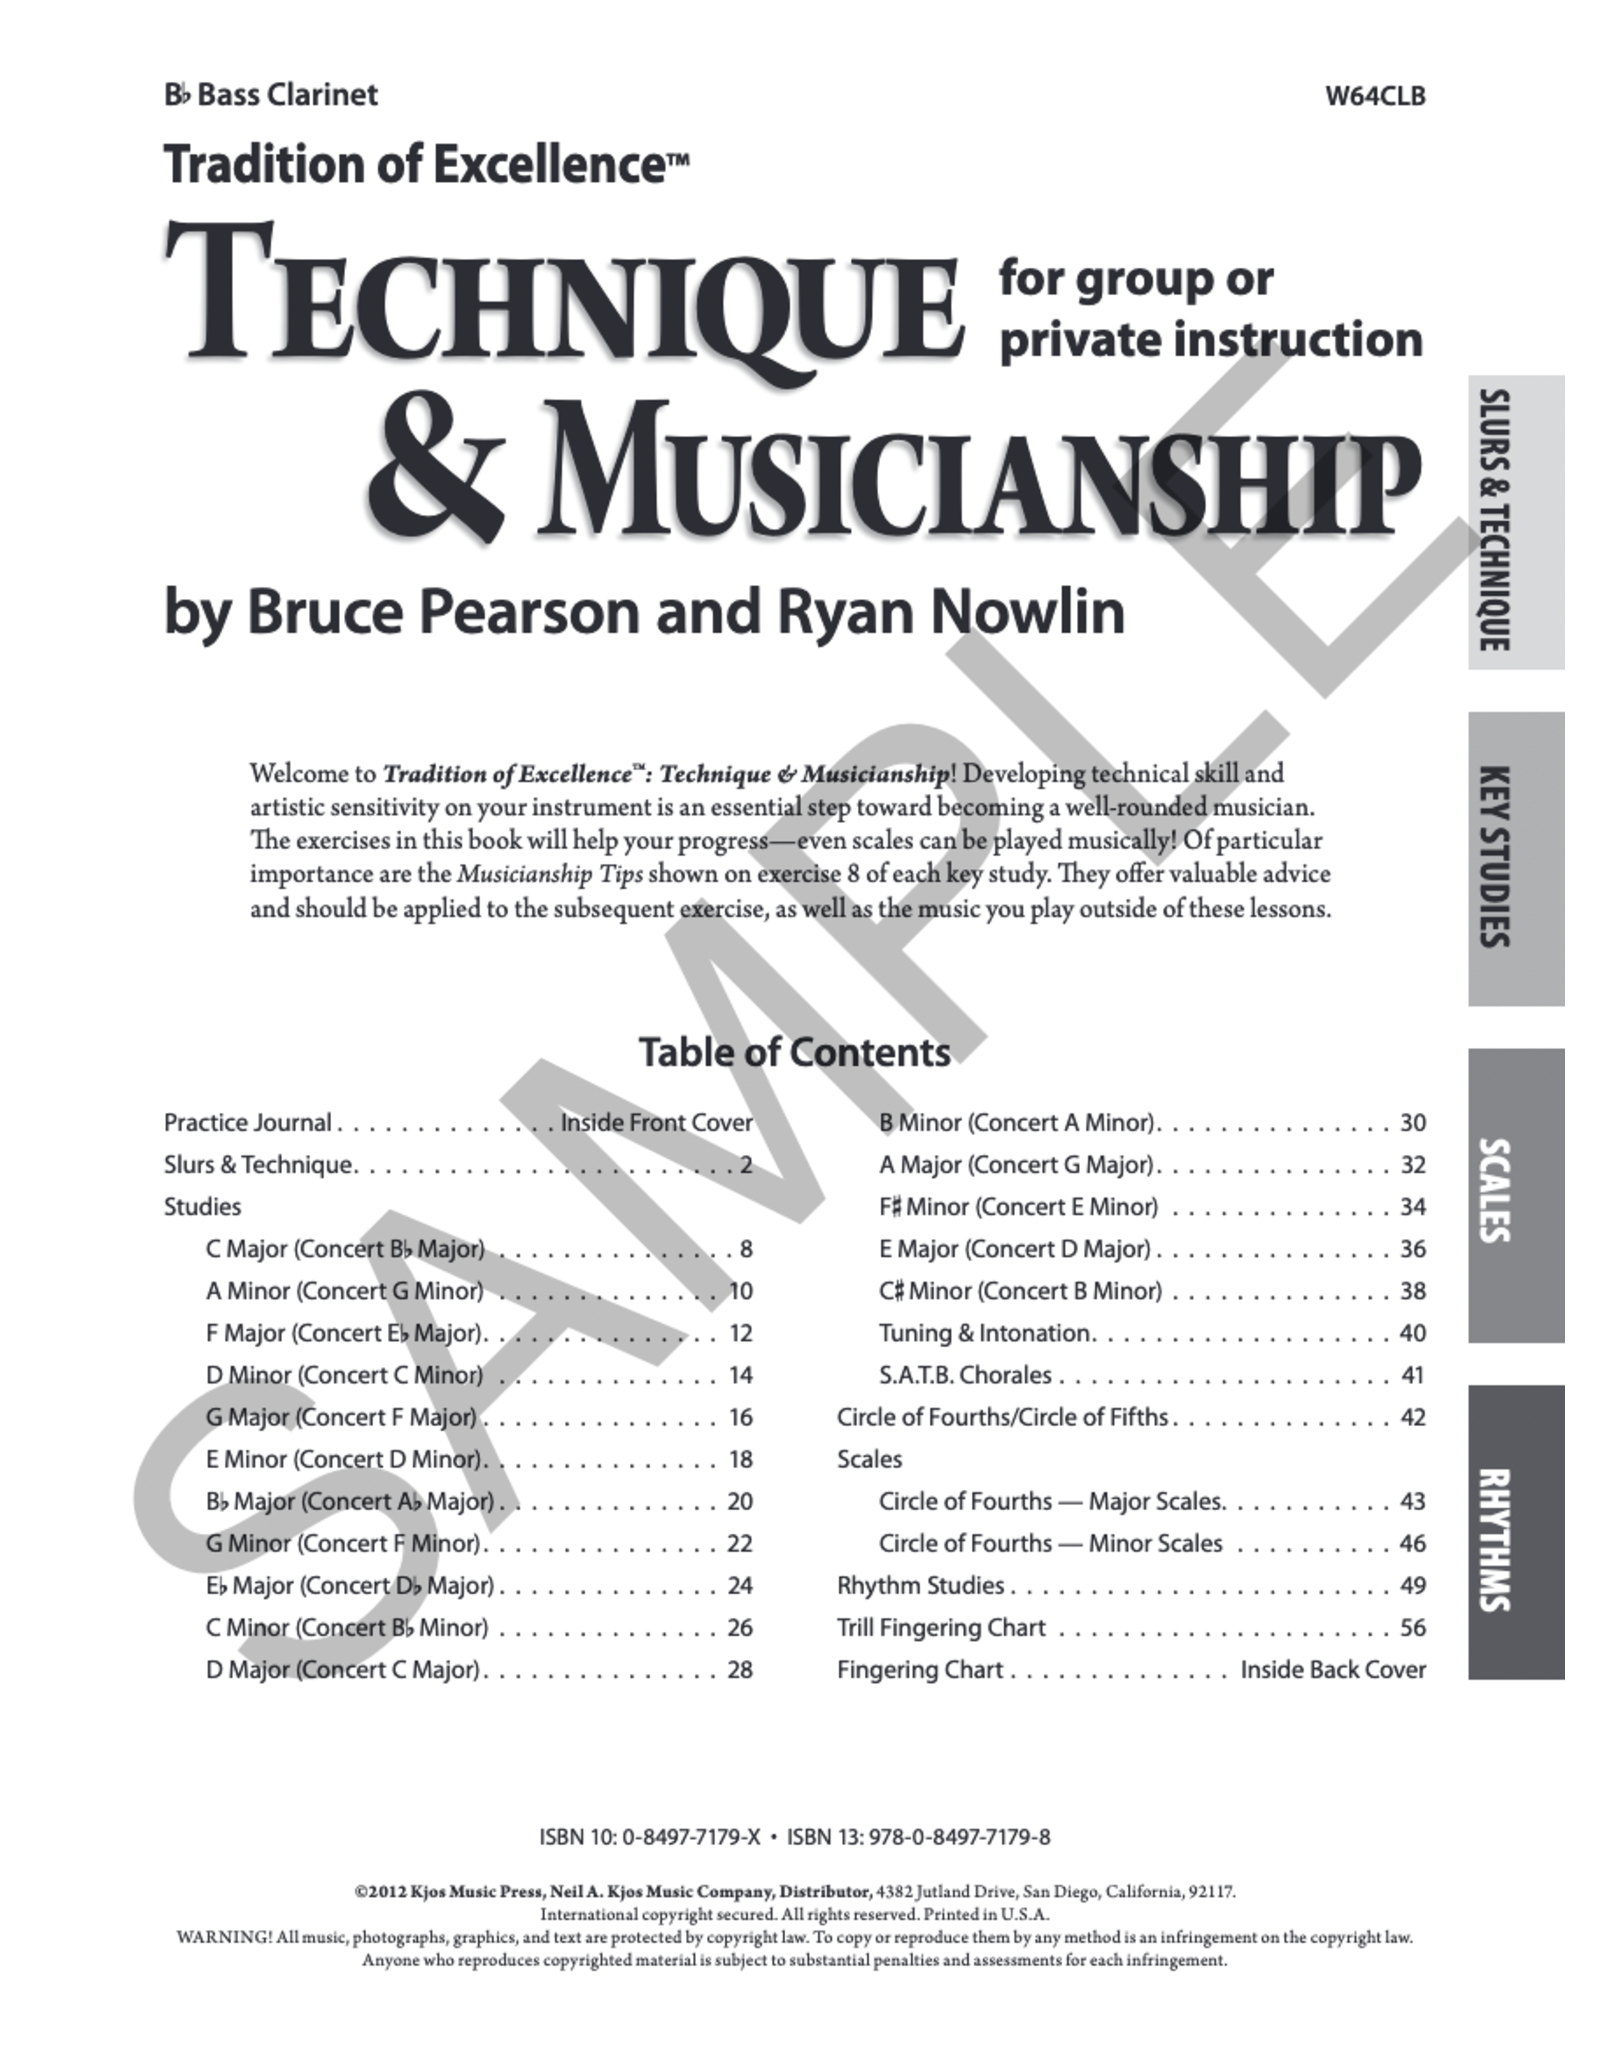 Kjos Tradition of Excellence: Technique and Musicianship - Bass Clarinet